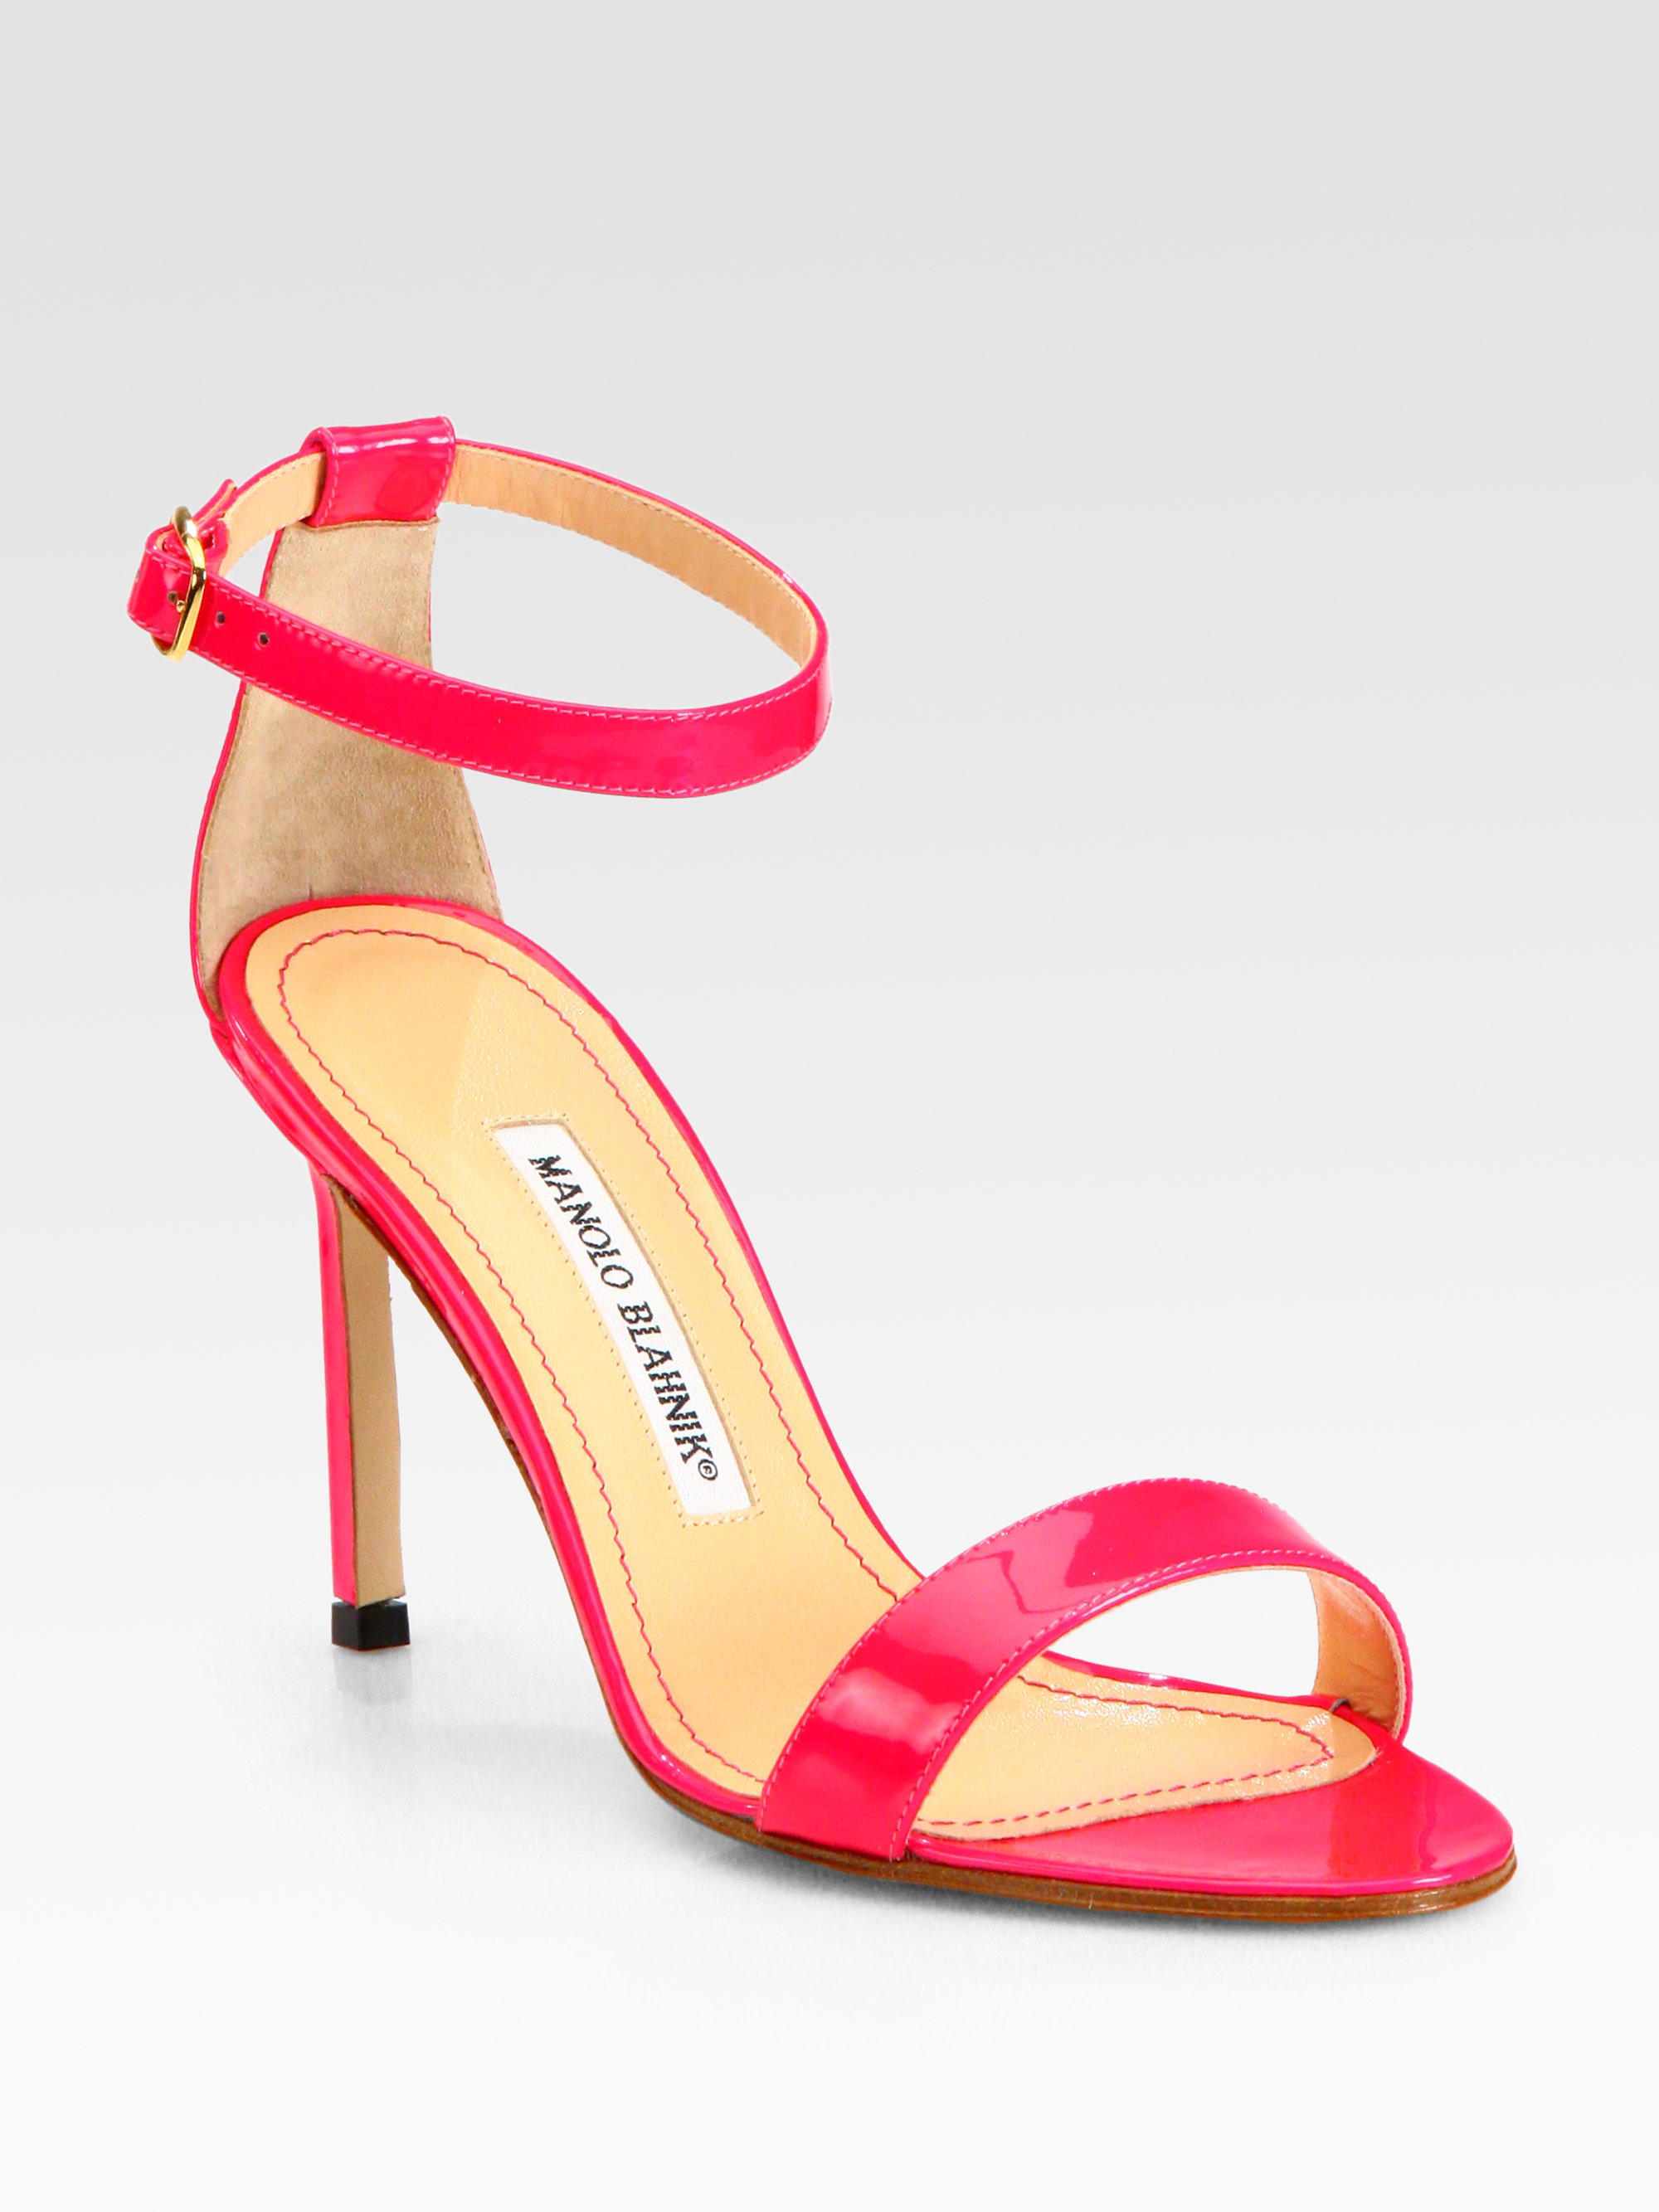 Manolo Blahnik Chaos Patent Leather Ankle Strap Sandals in Pink | Lyst